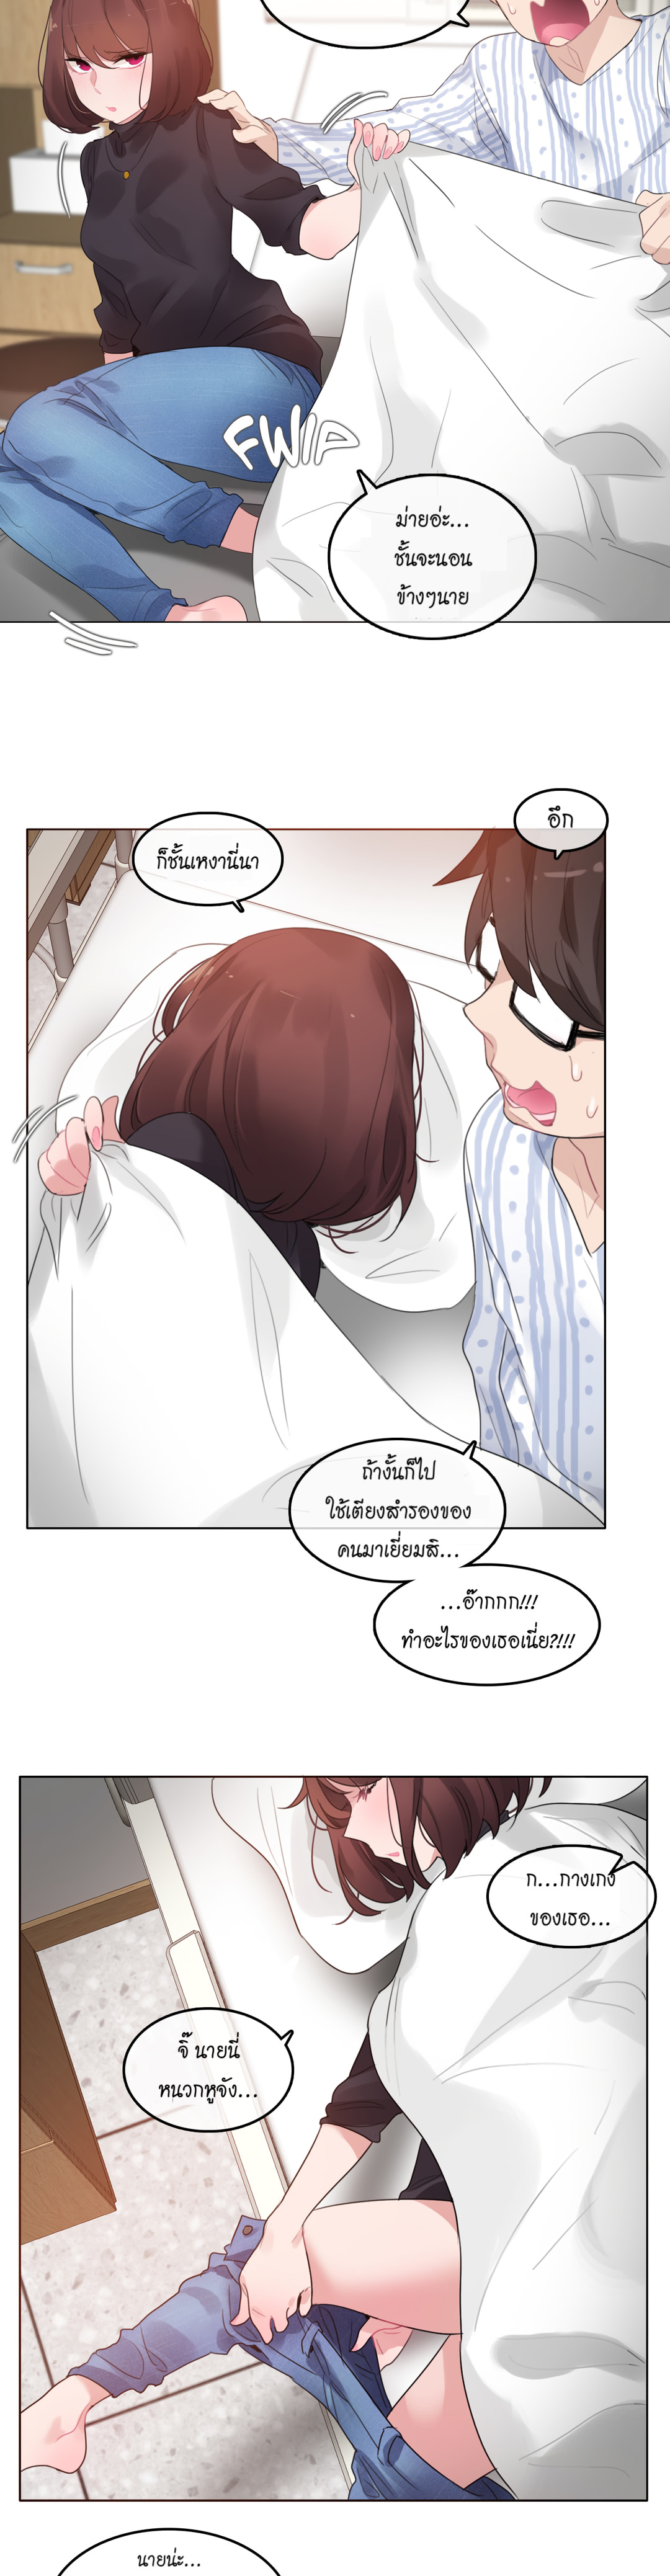 A Pervert’s Daily Life50 (11)